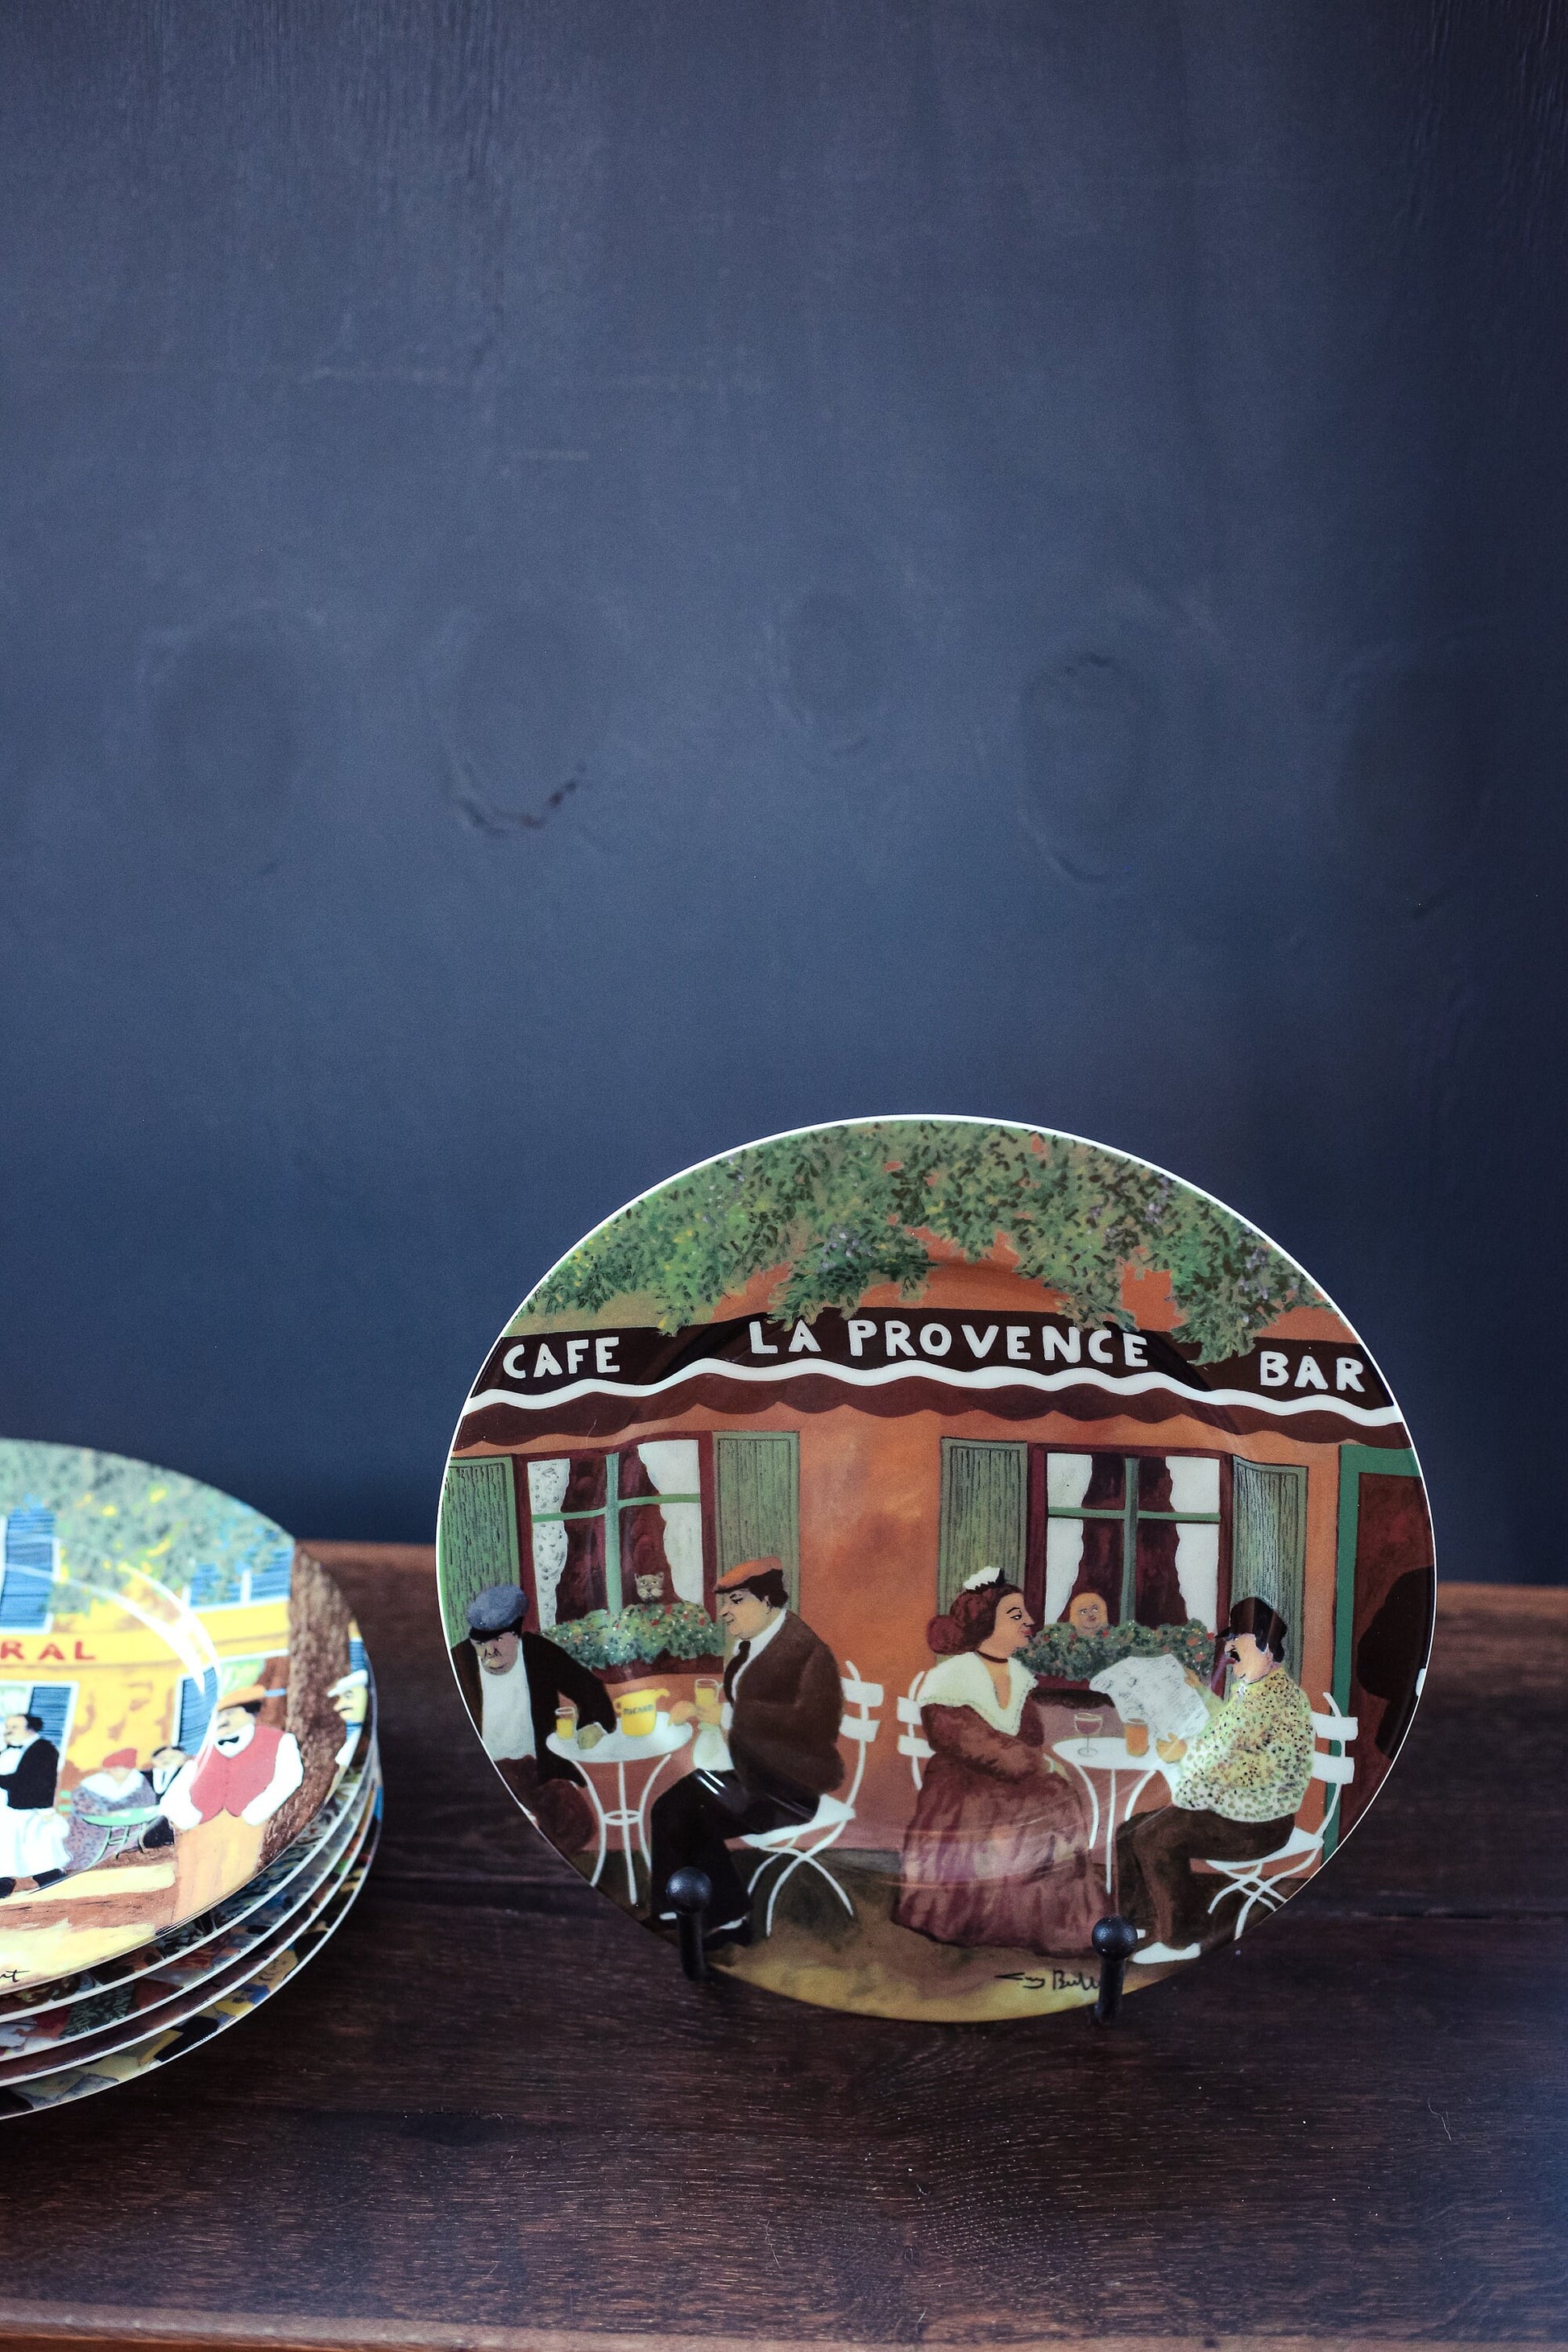 Guy Buffet Collectible Plates - Sold Individually select from dropdown